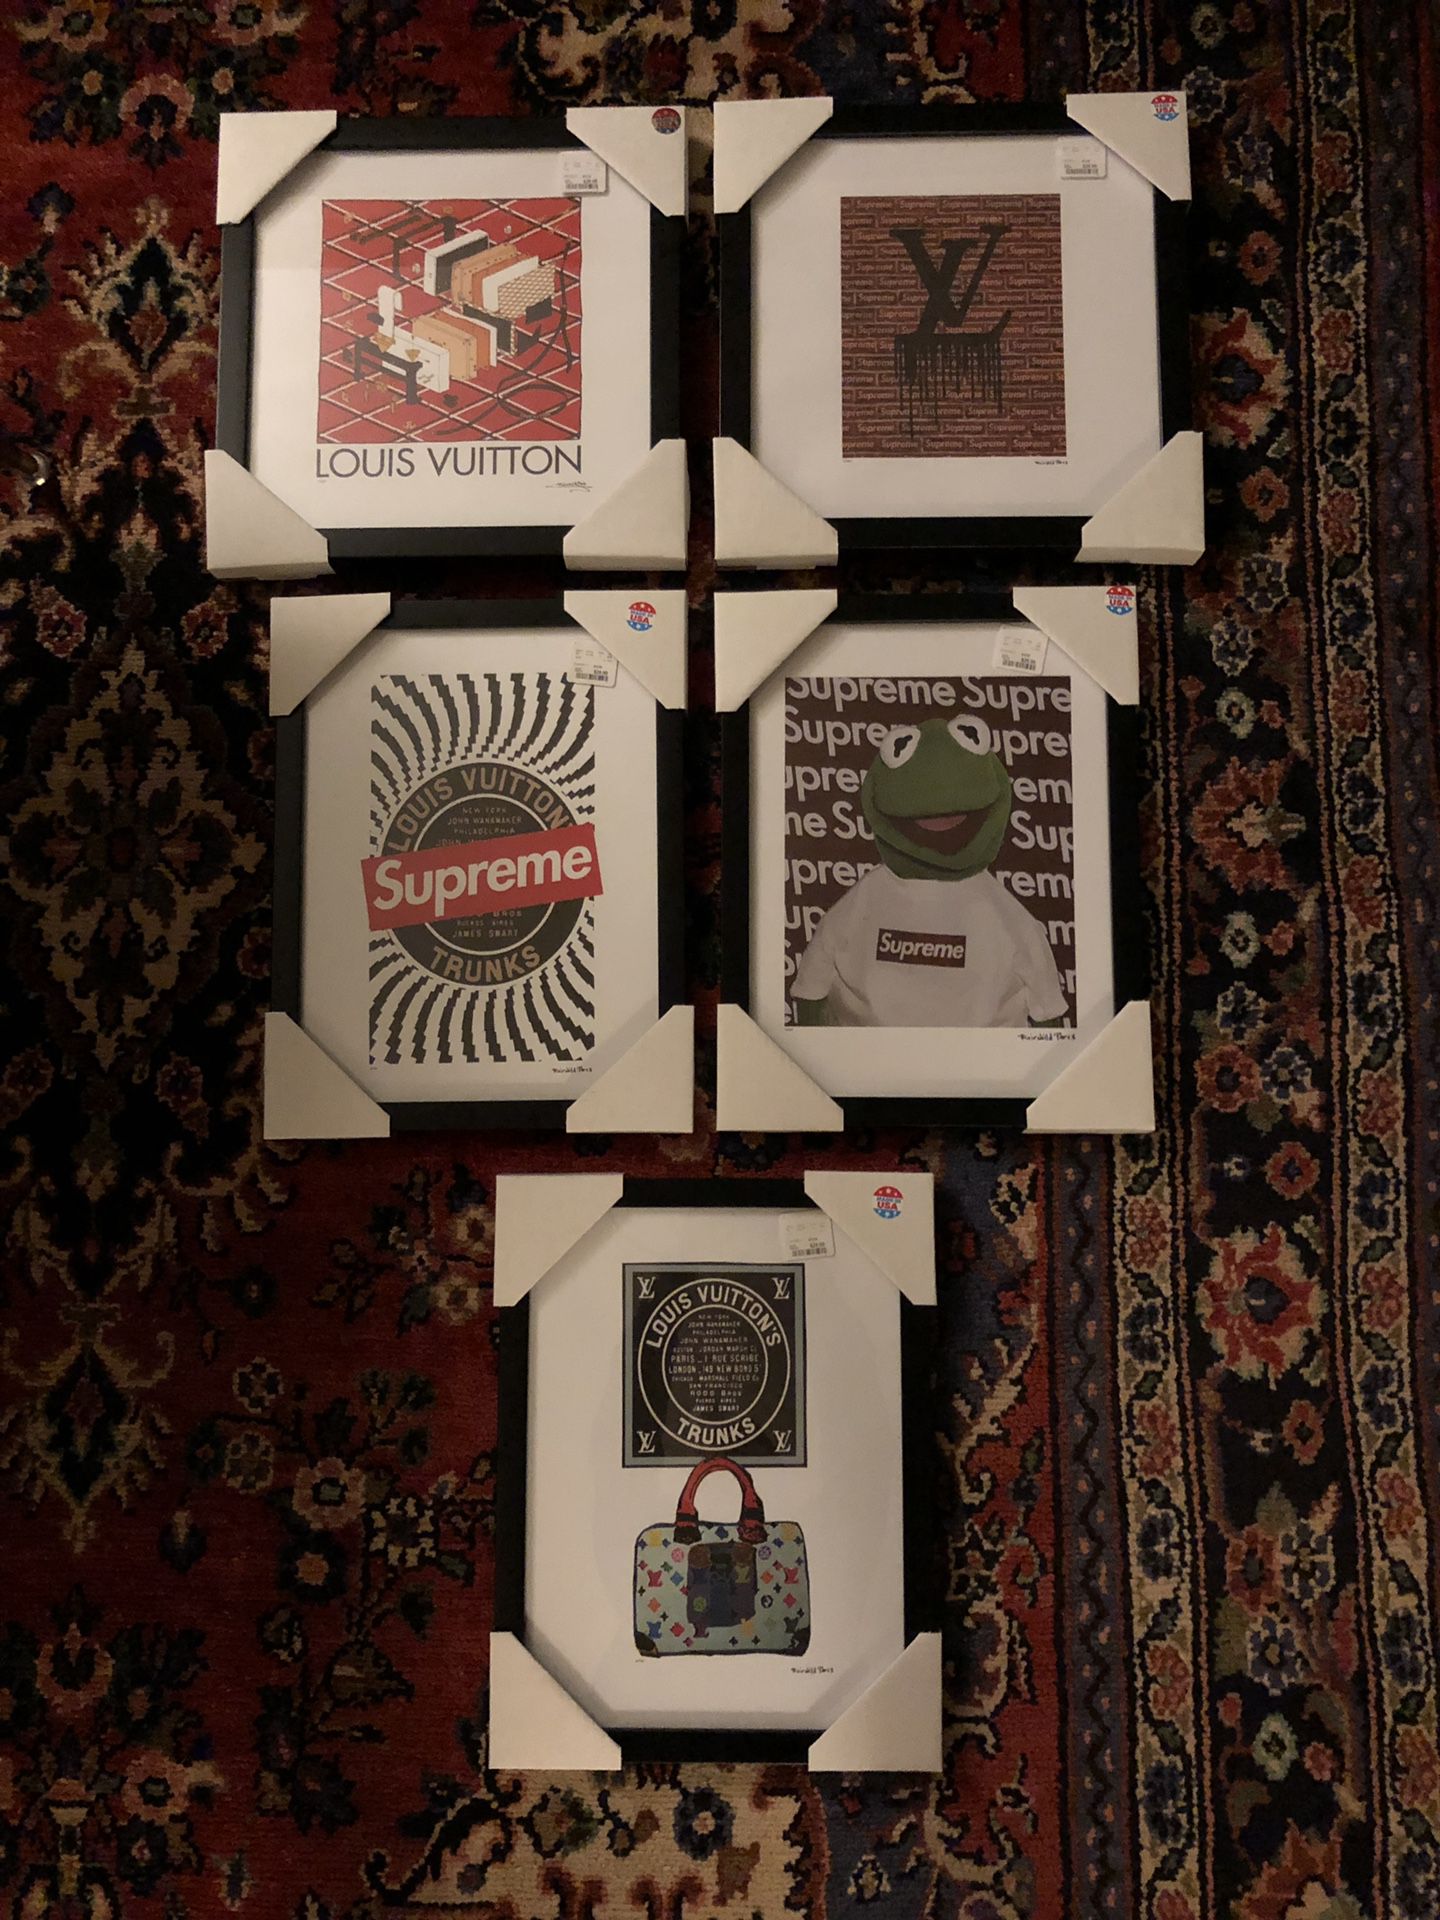 Supreme x Louis Vuitton (Fairchild Paris framed prints, limited by number)  for Sale in Issaquah, WA - OfferUp